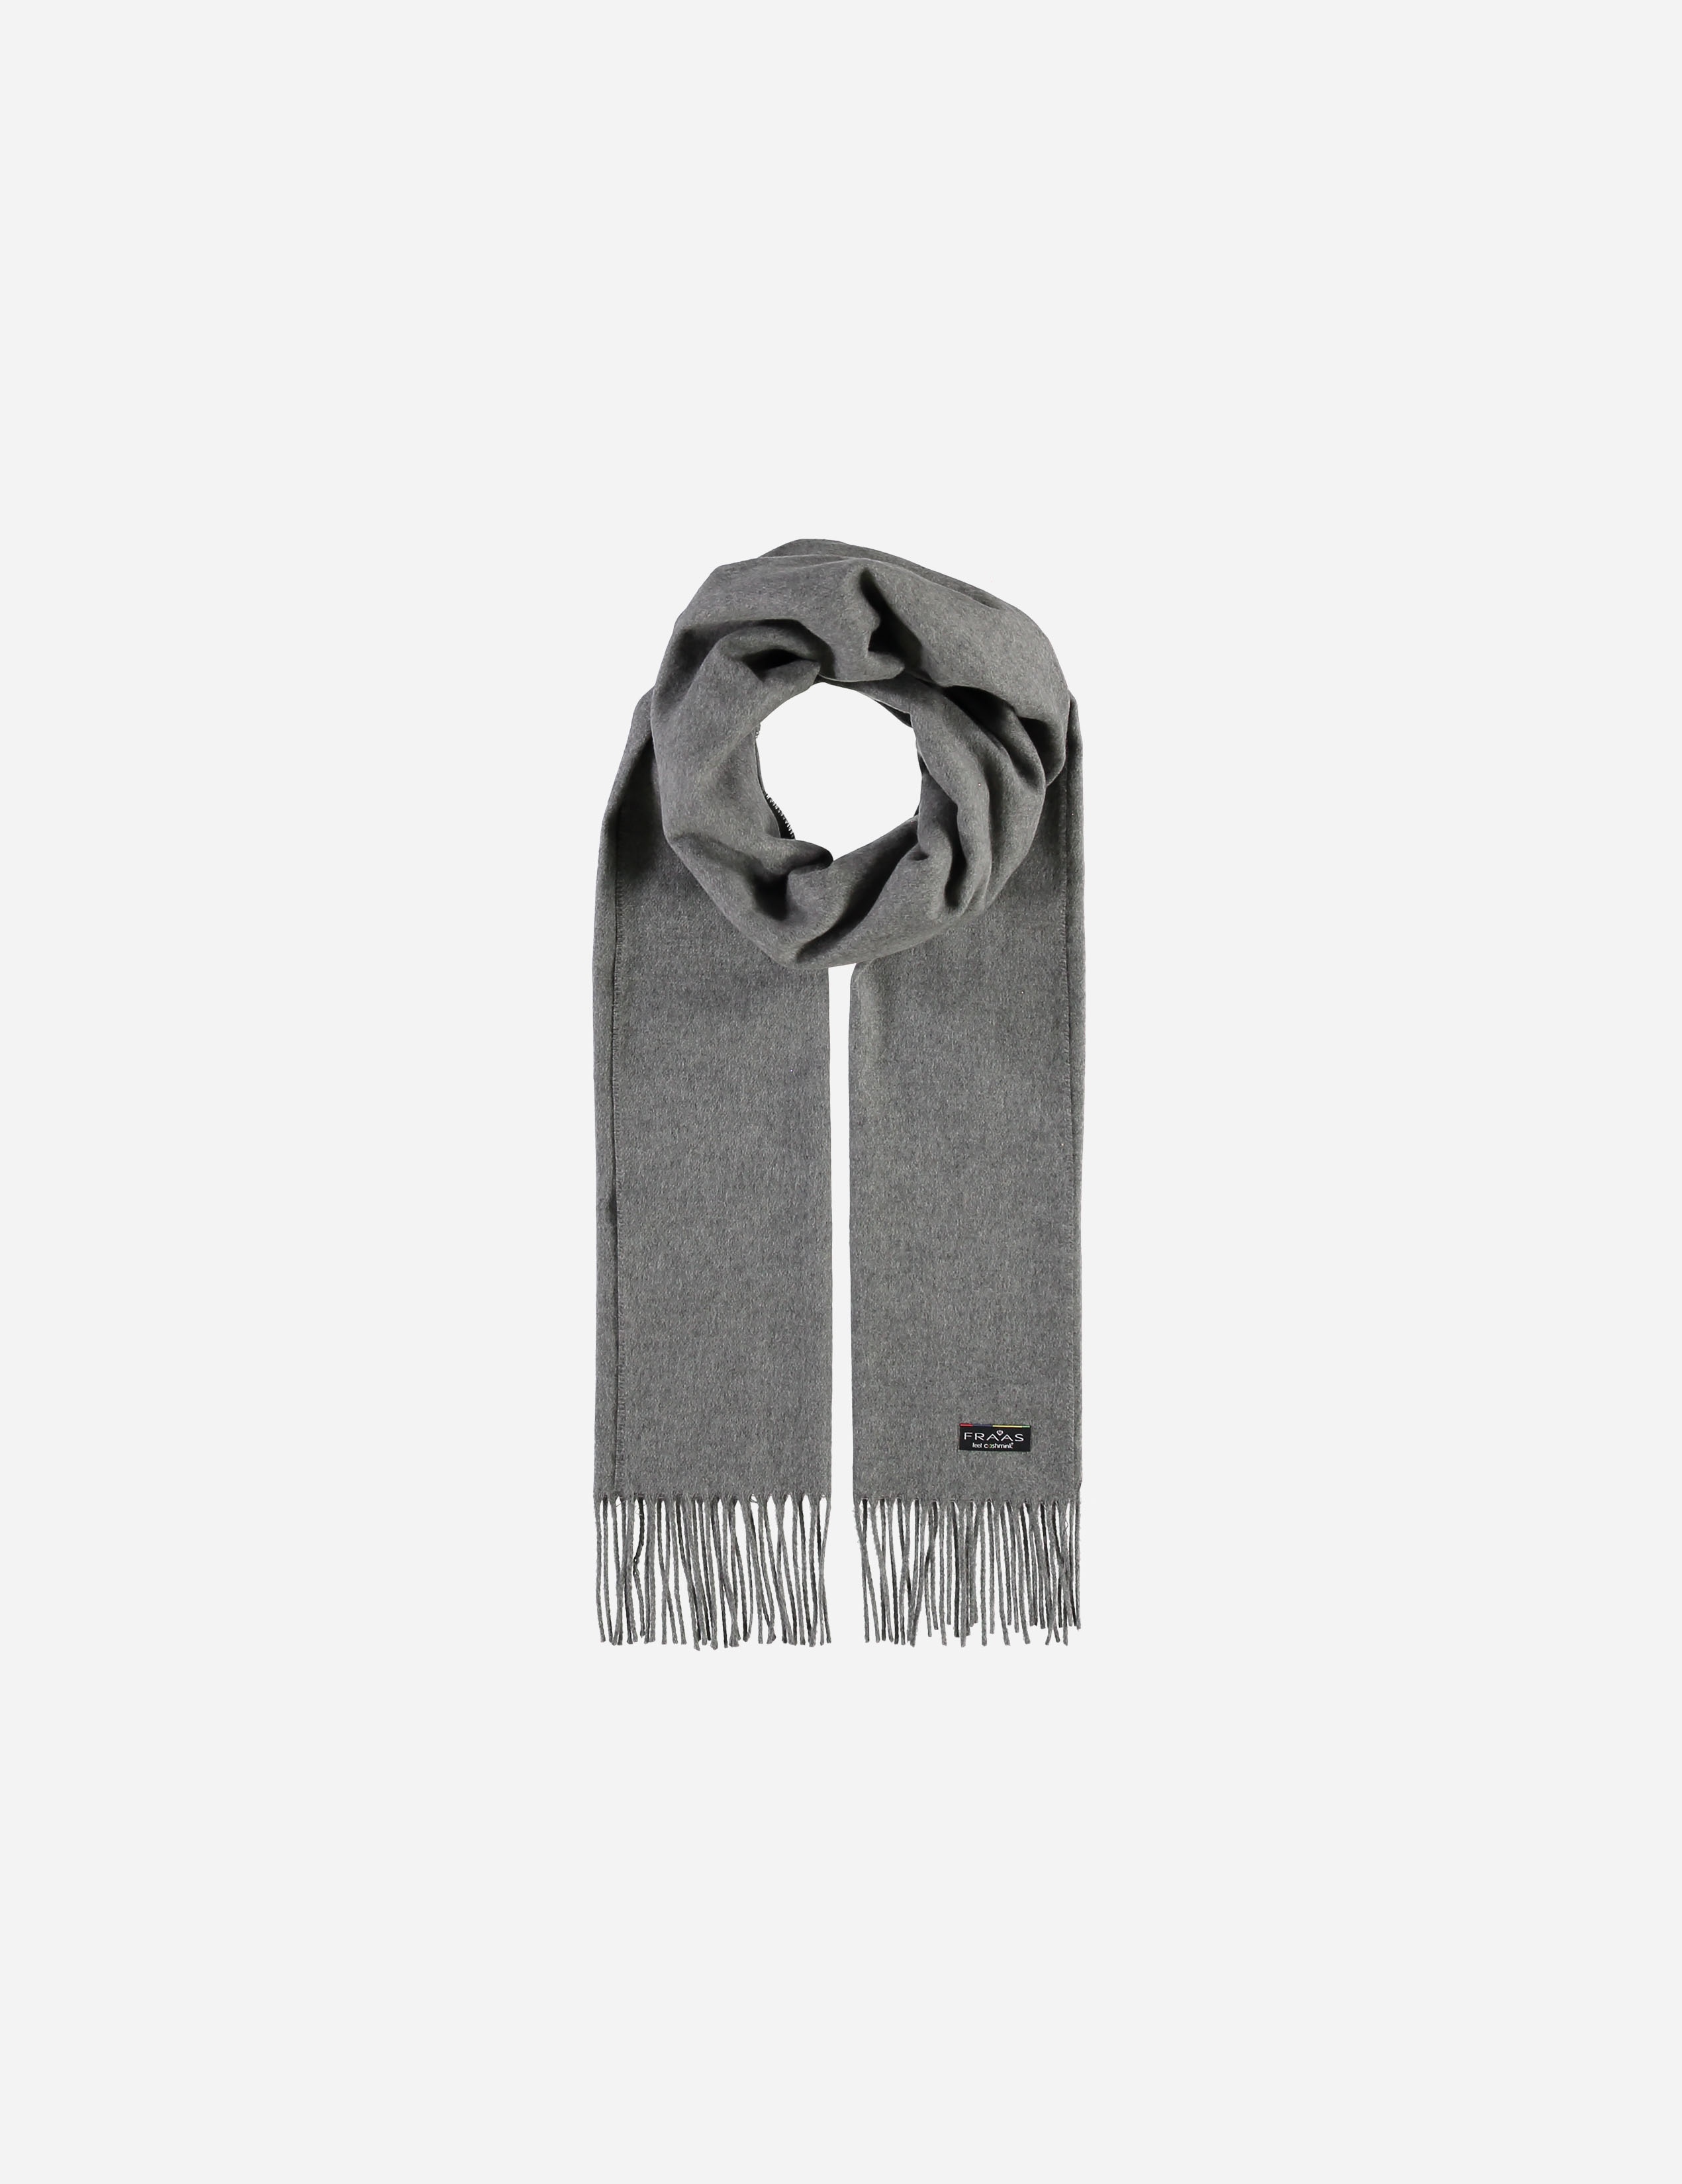 Solid Grey- $32.00
Cashmink, Made in Germany
4035419045539